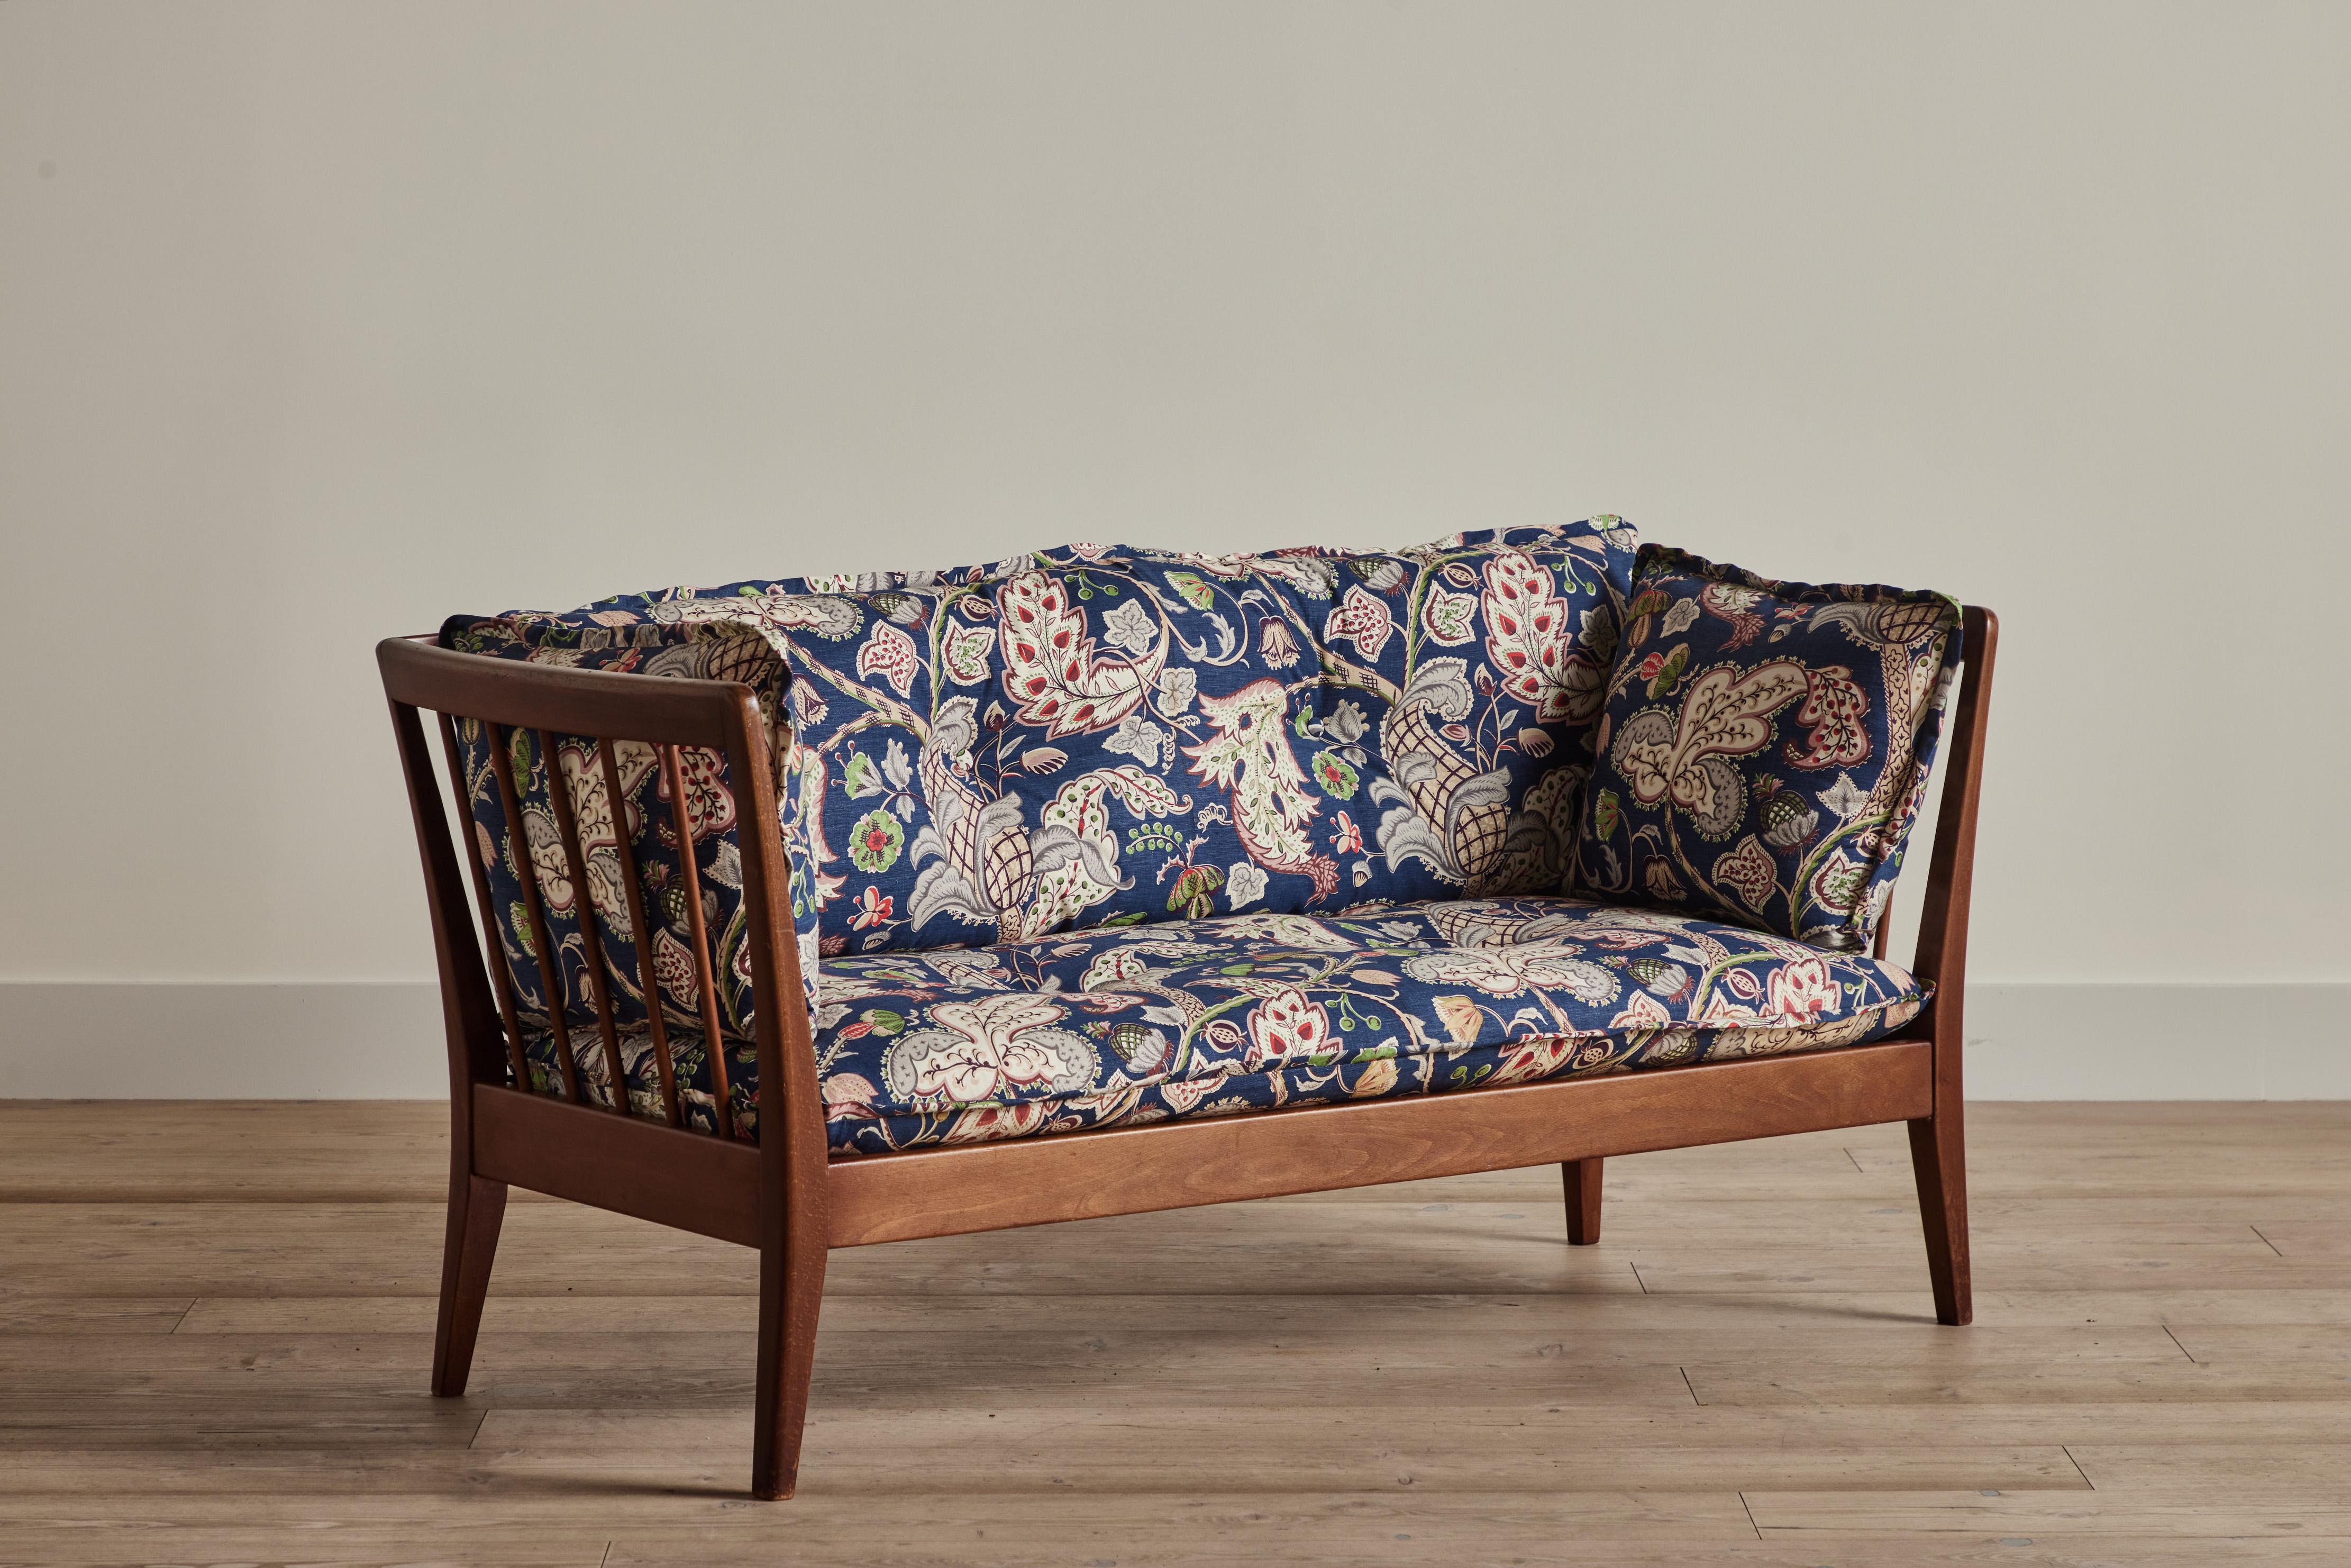 Spindle back settee from Denmark circa 1960 with new cushions upholstered in vintage deadstock fabric.
